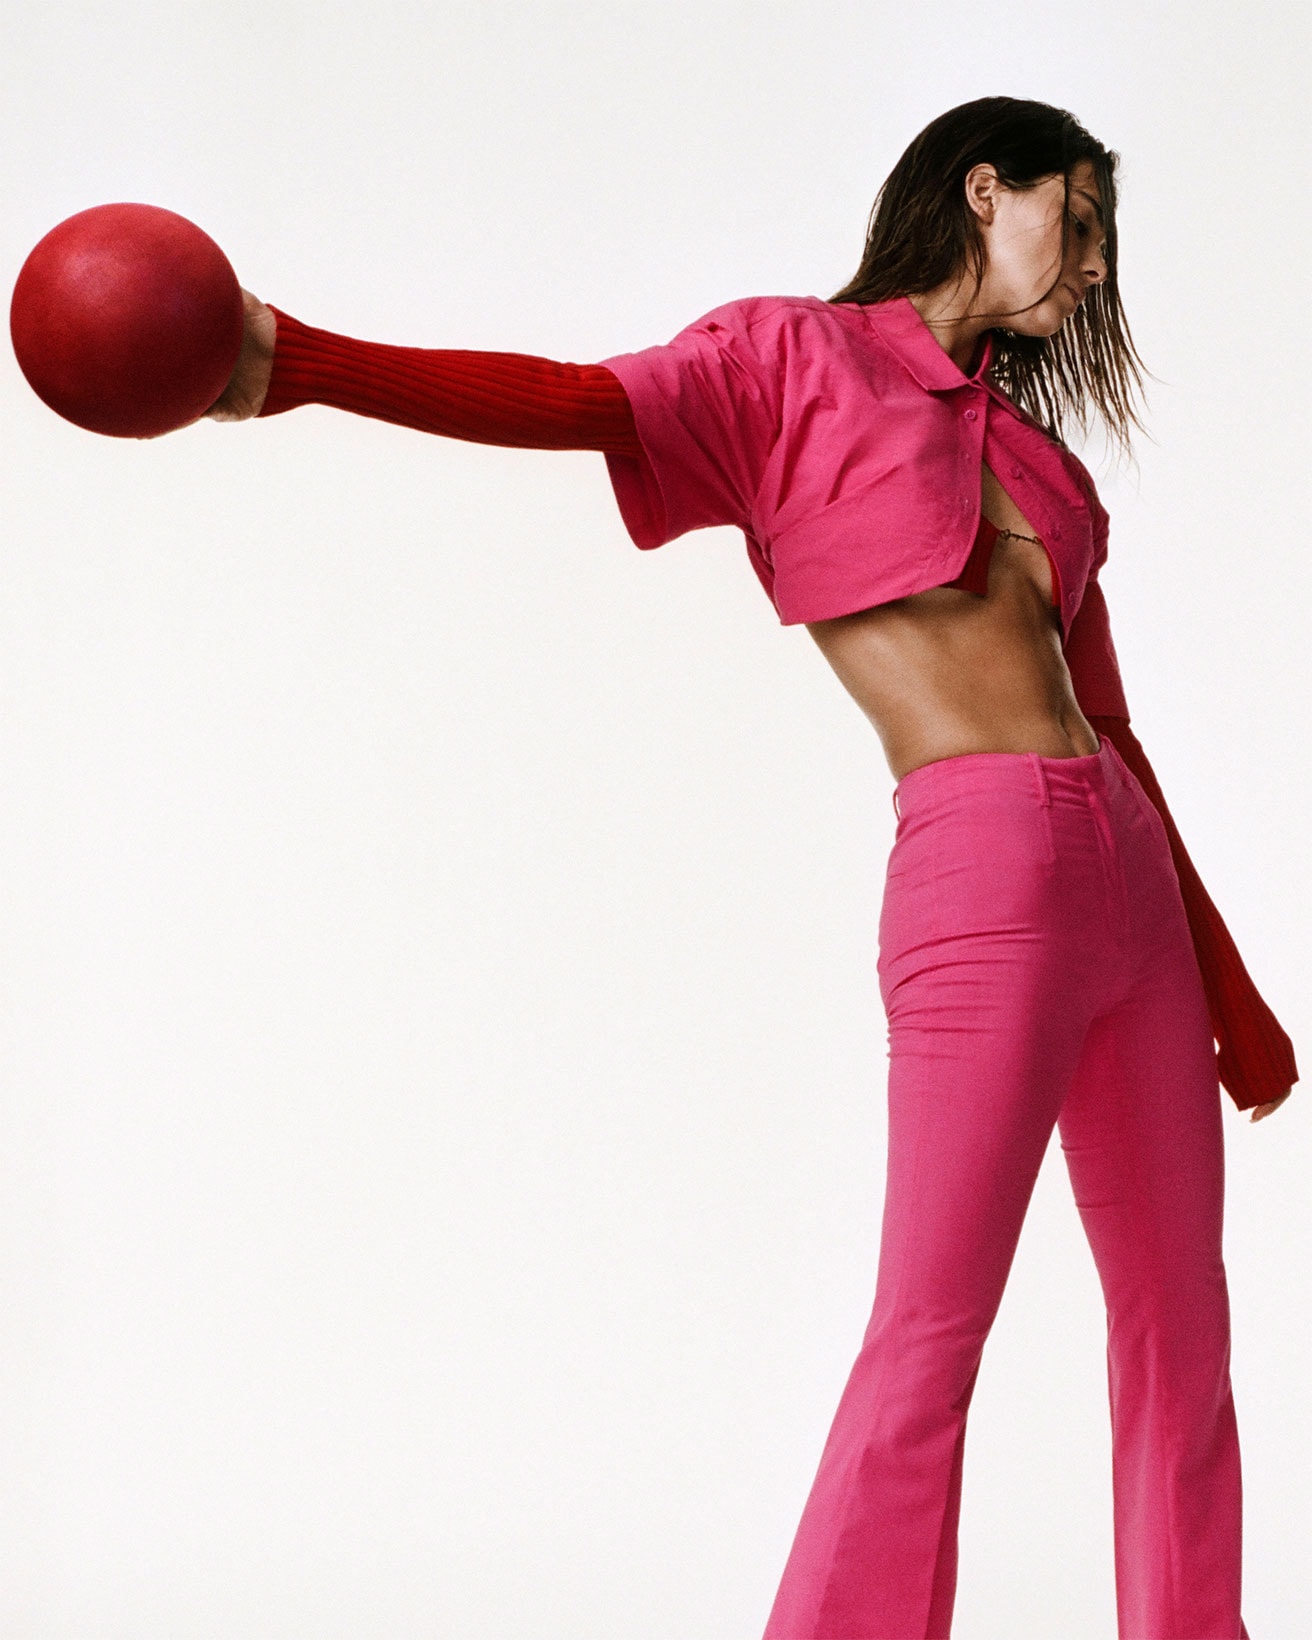 Jacquemus La Montagne Kendall Jenner Campaign Pink Top Bottom Trousers Ball